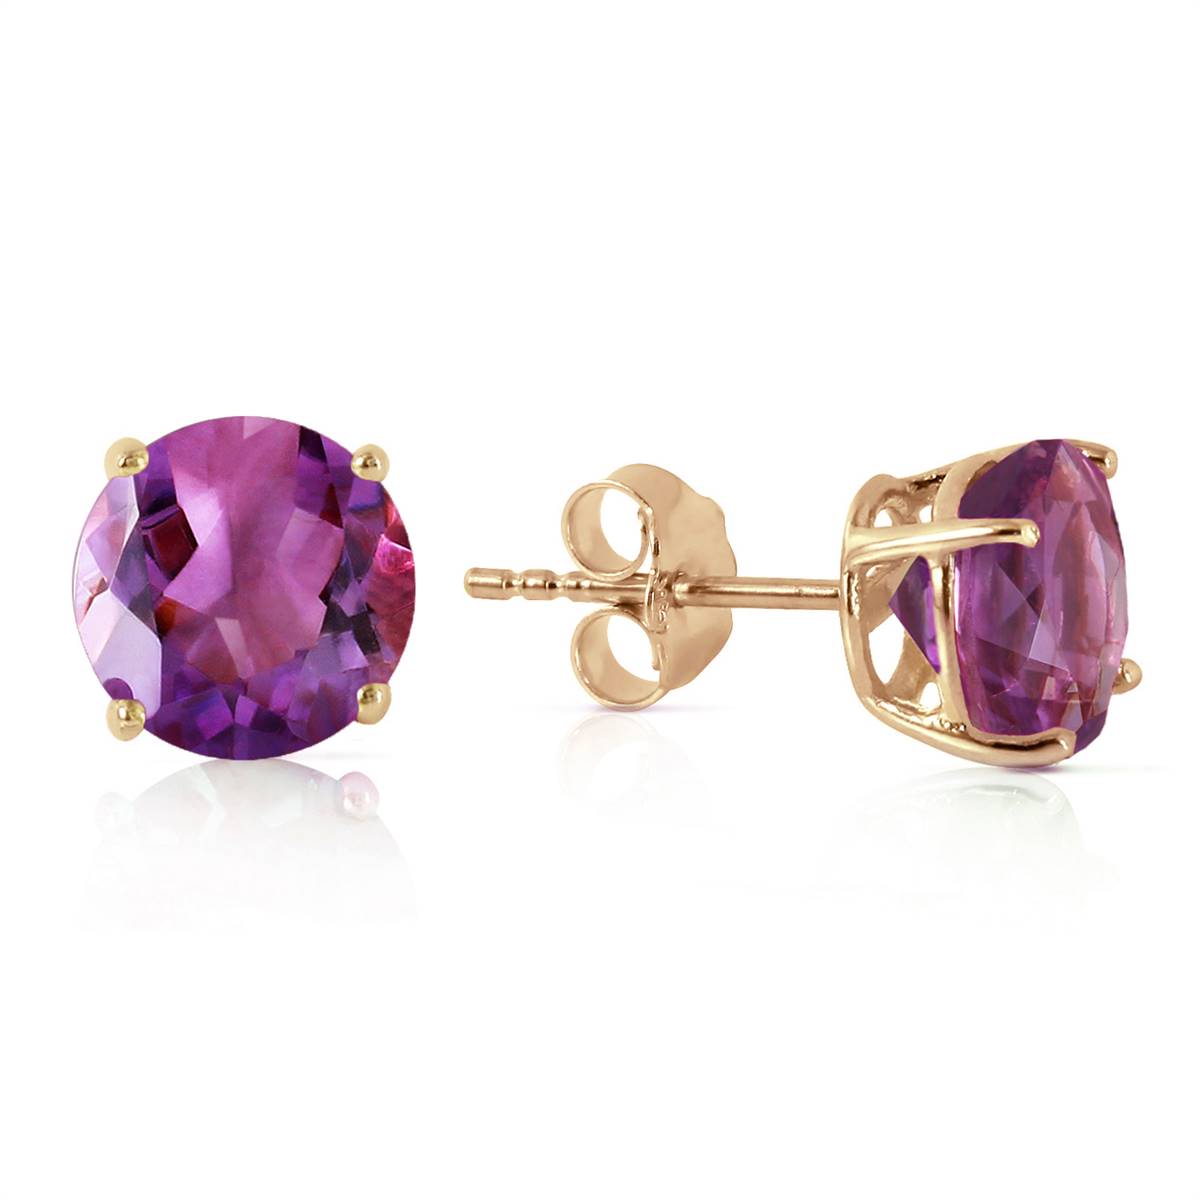 3.1 Carat 14K Solid Yellow Gold No Discord Amethyst Earrings